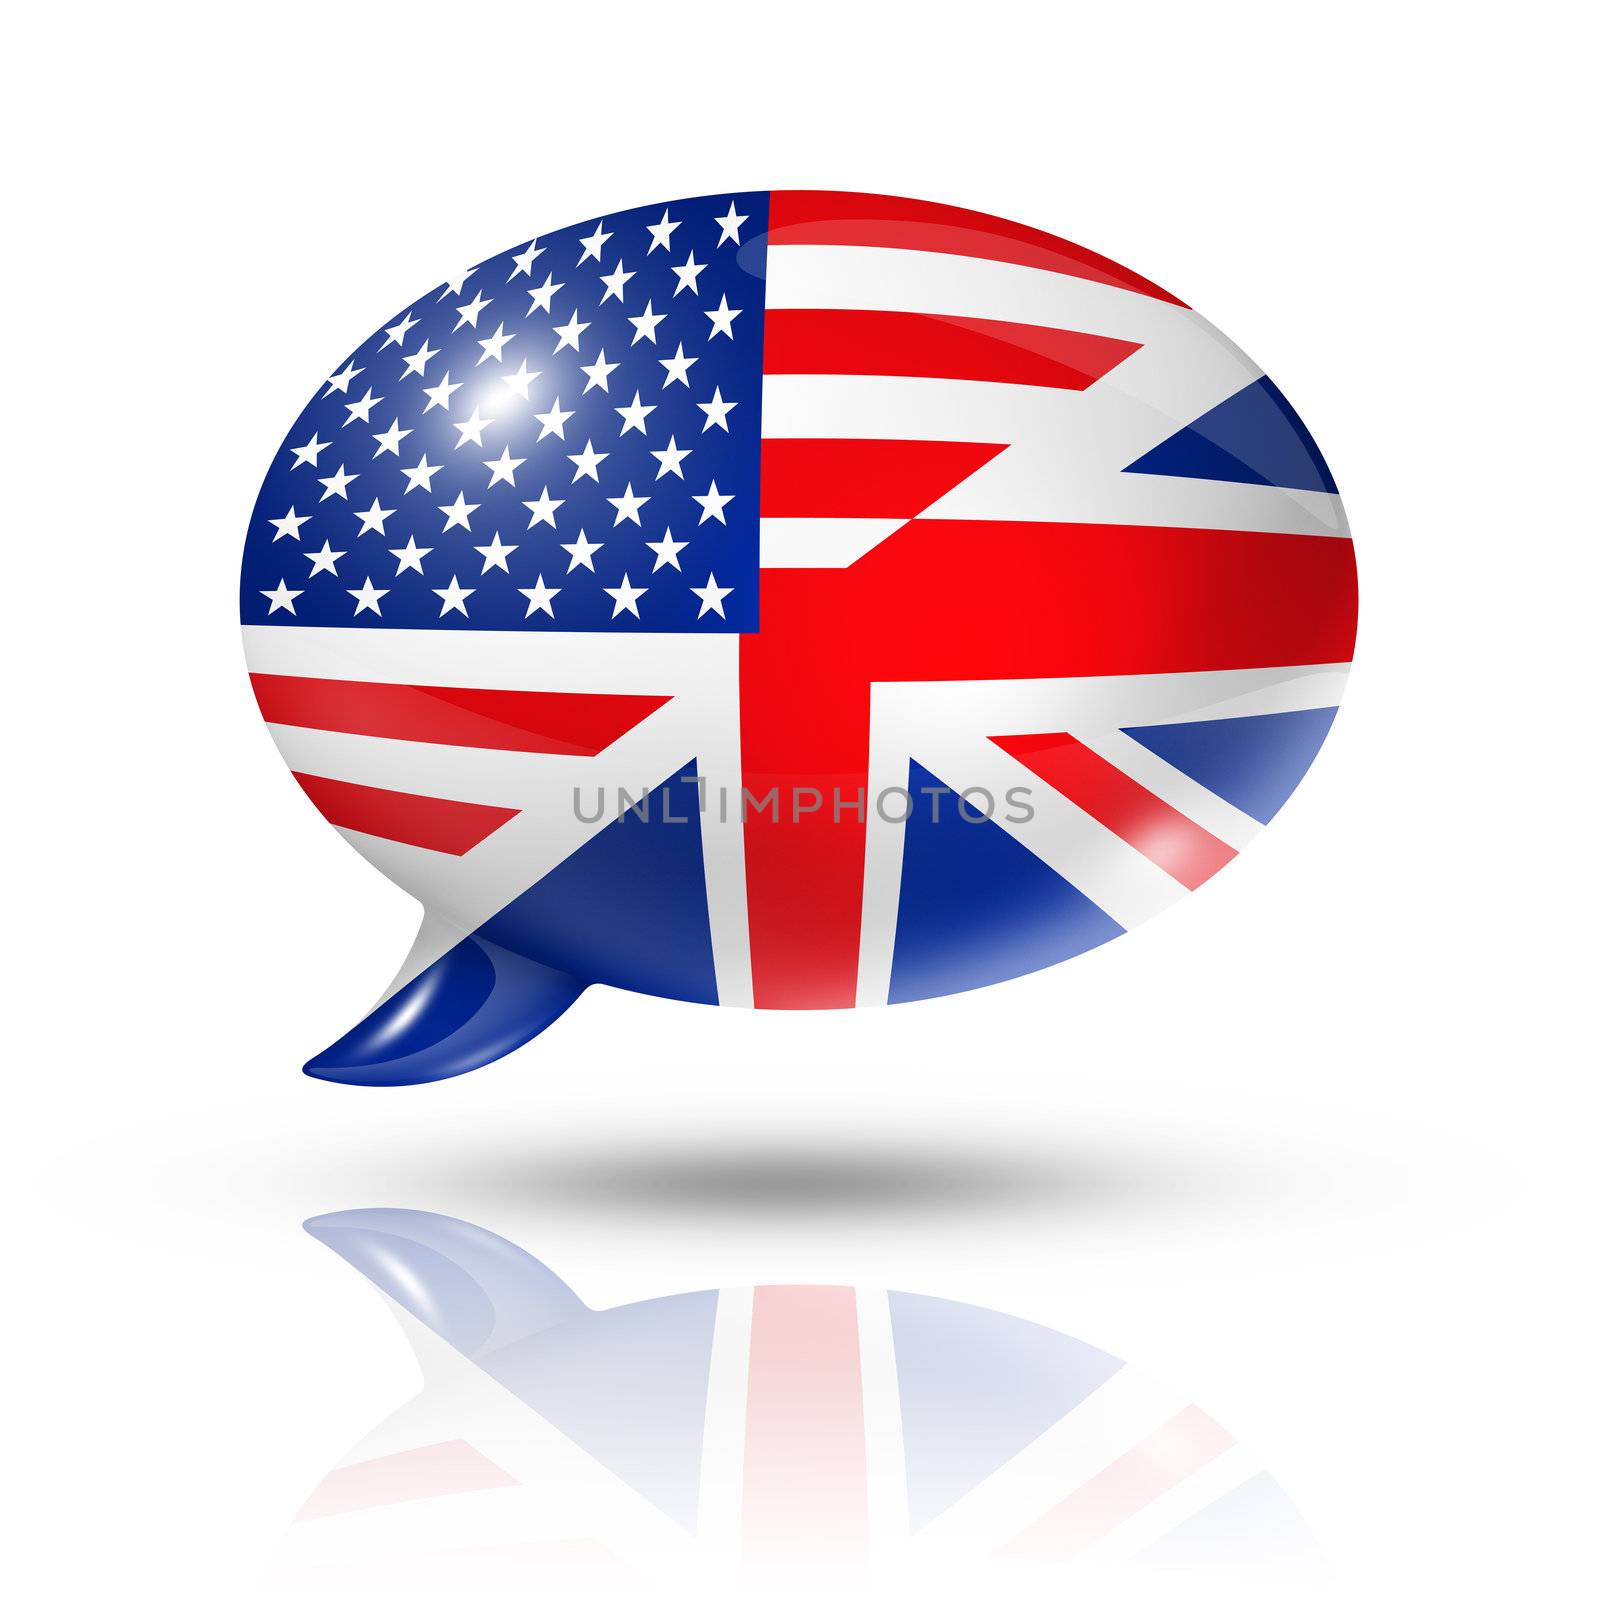 UK and USA flags speech bubble by daboost